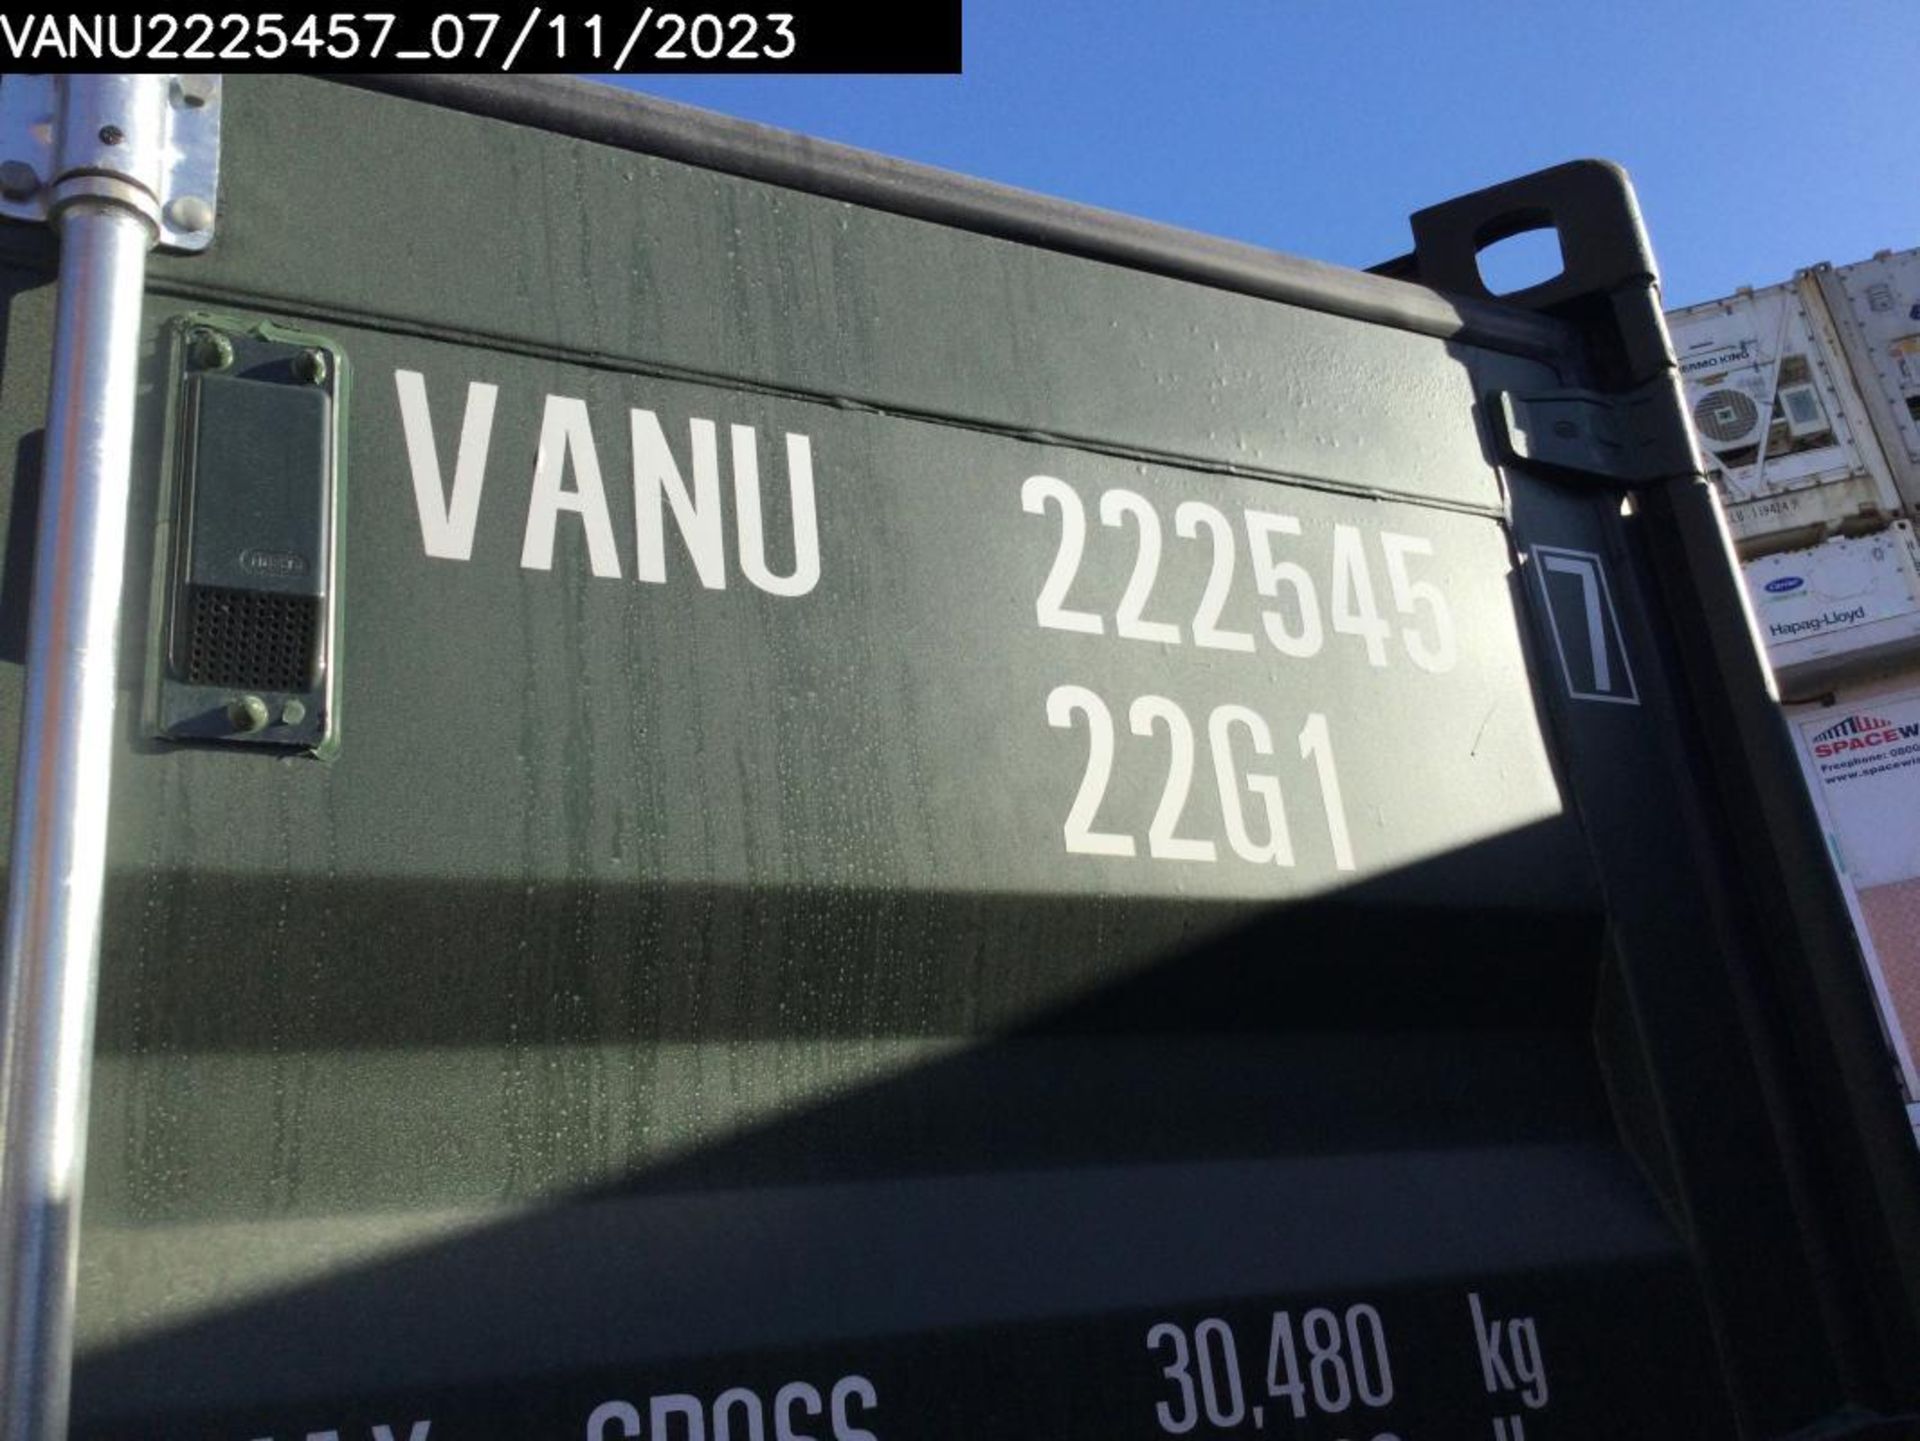 One Trip 20ft Shipping Container - Unit Number – VANU2225457 - Image 4 of 10